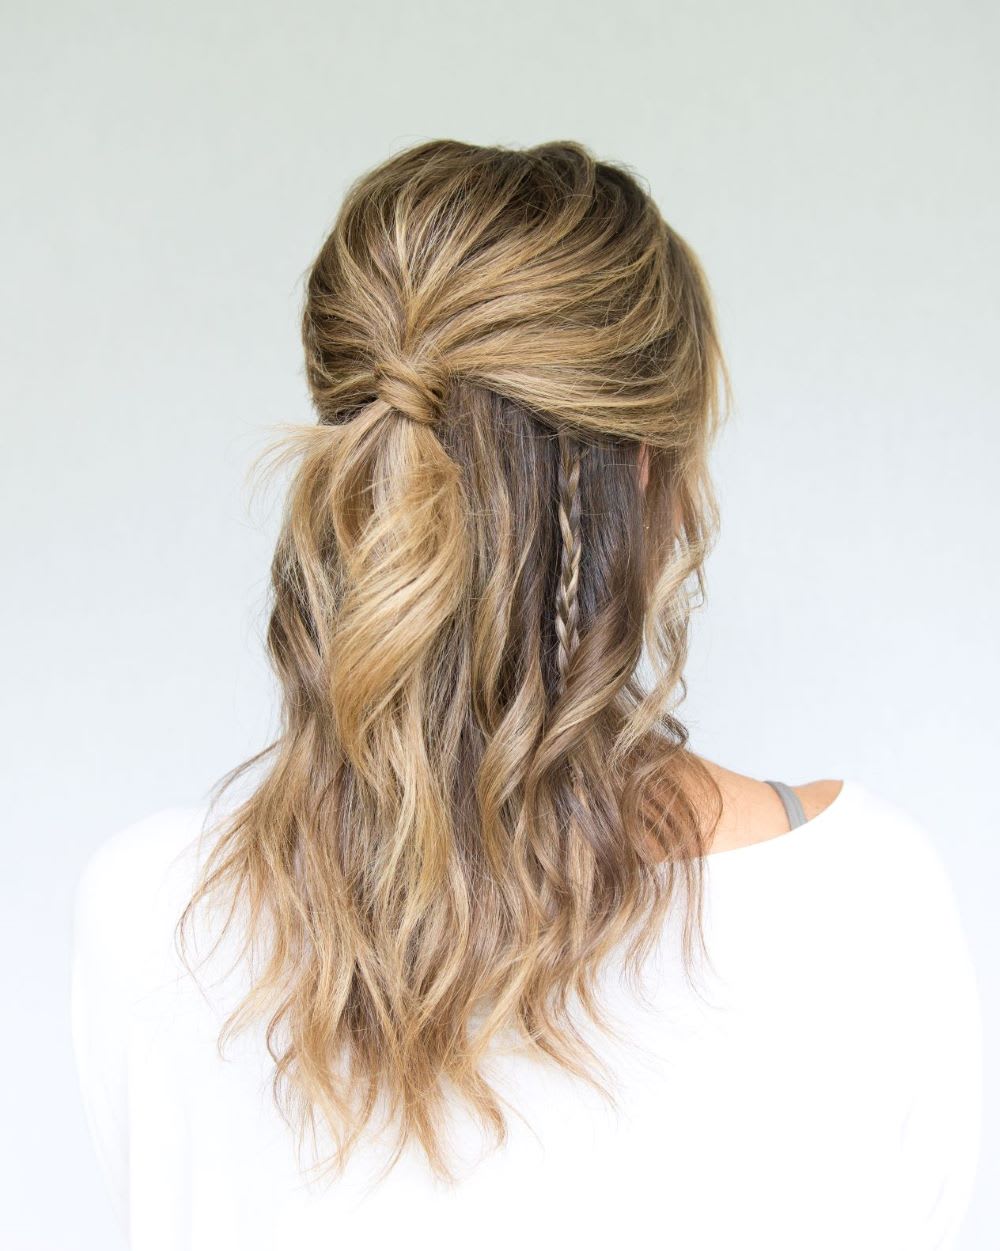 Go Boho This With Half-Up Half-Down Hairstyle  Fashion Blog